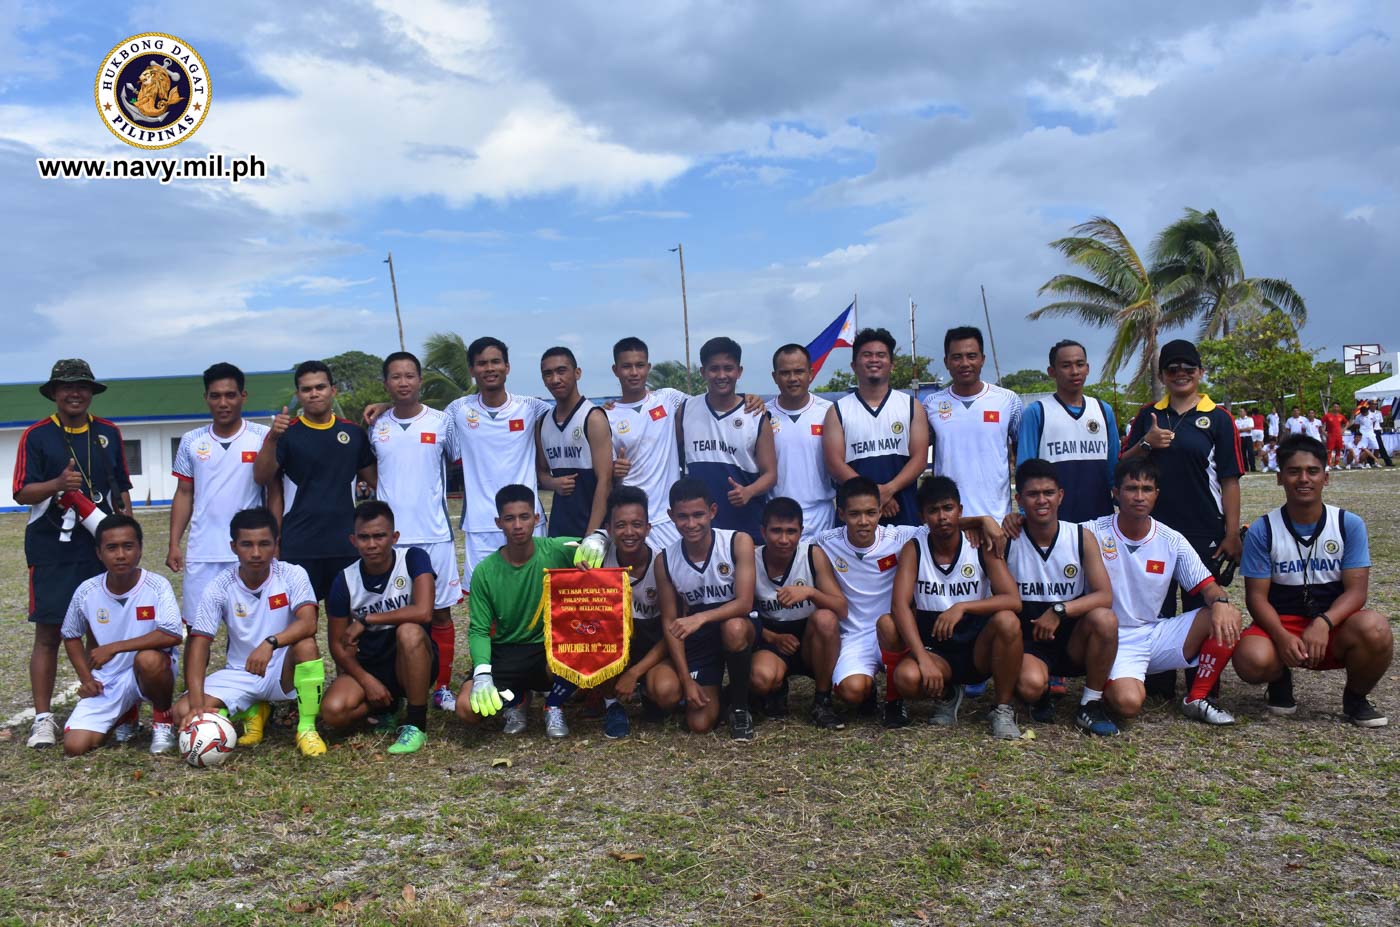 COMRADES. The members of the Philippine and Vietnam navies which played games volleyball on disputed island. Photo courtesy of Philippine Navy  